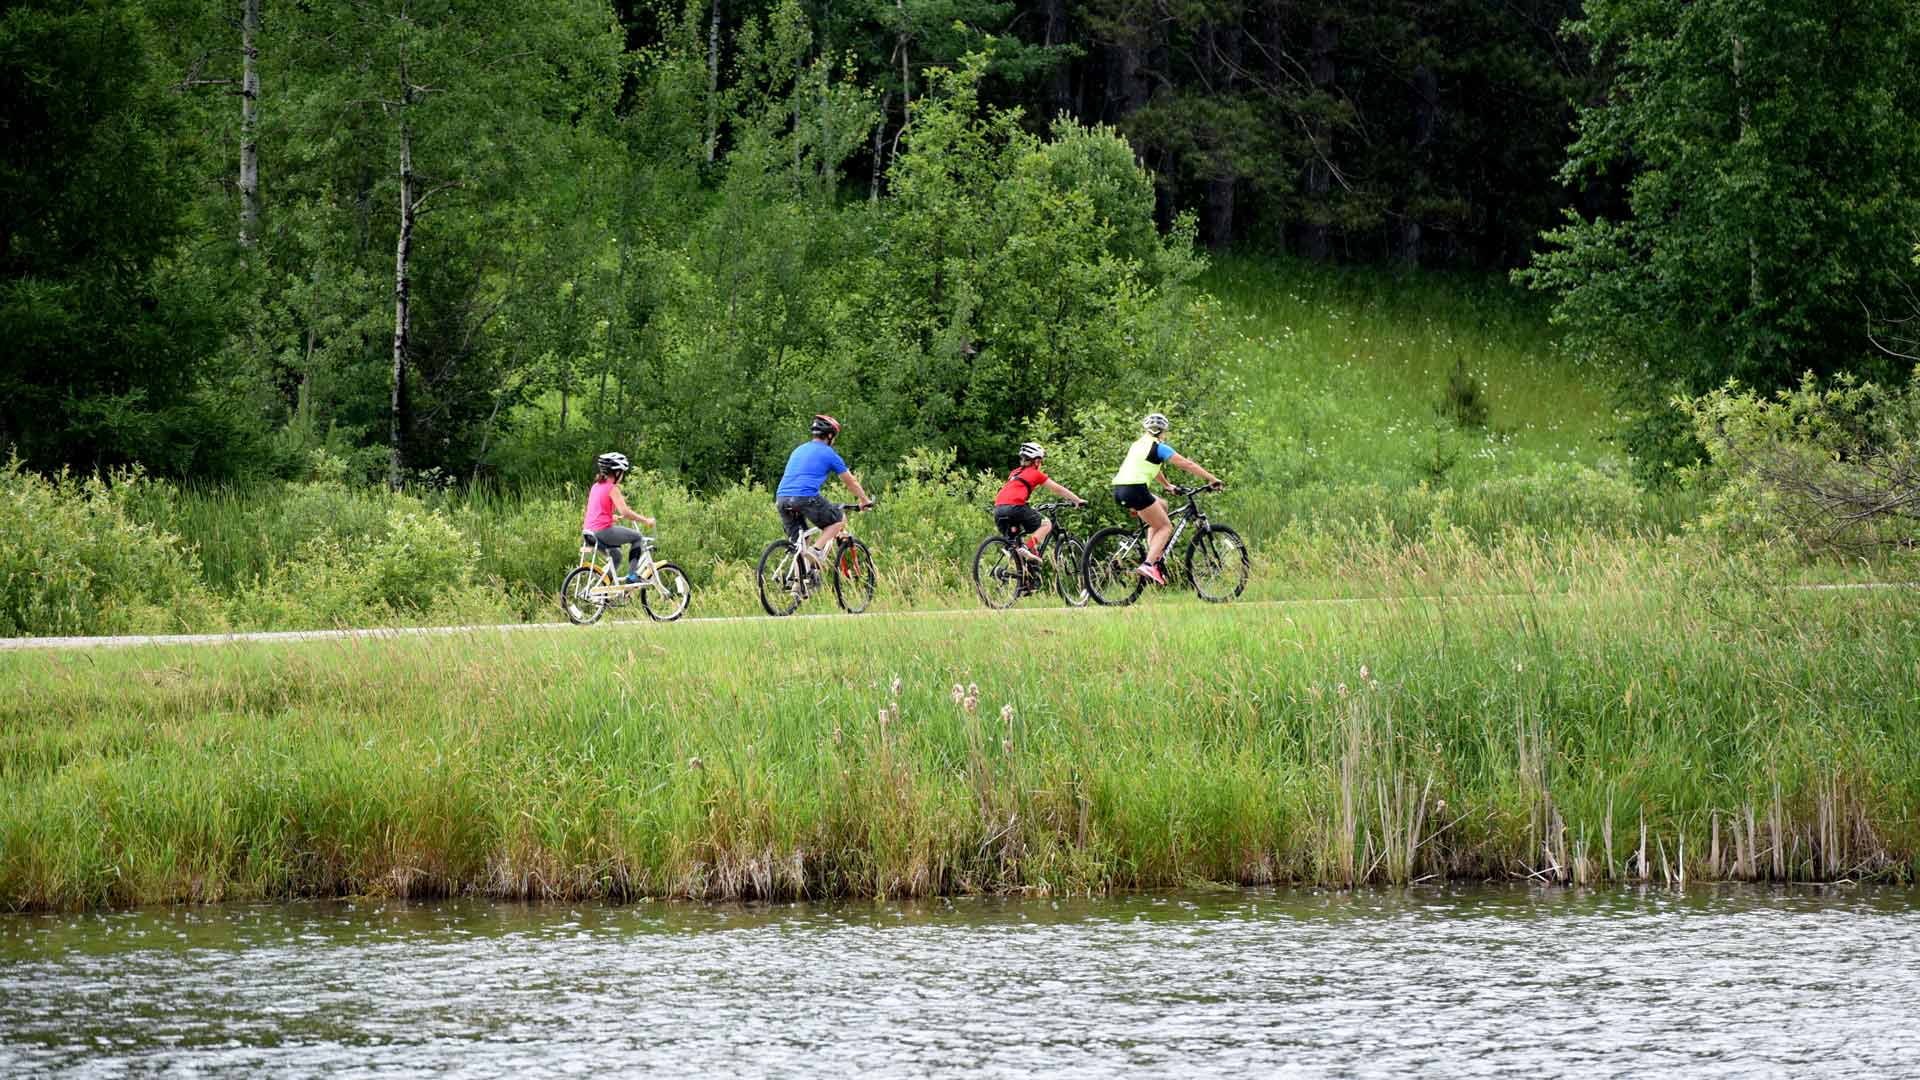 Group of cyclists riding on forest trail near water of Presque Isle Pomeroy Henry Trails in Vilas County, Wisconsin